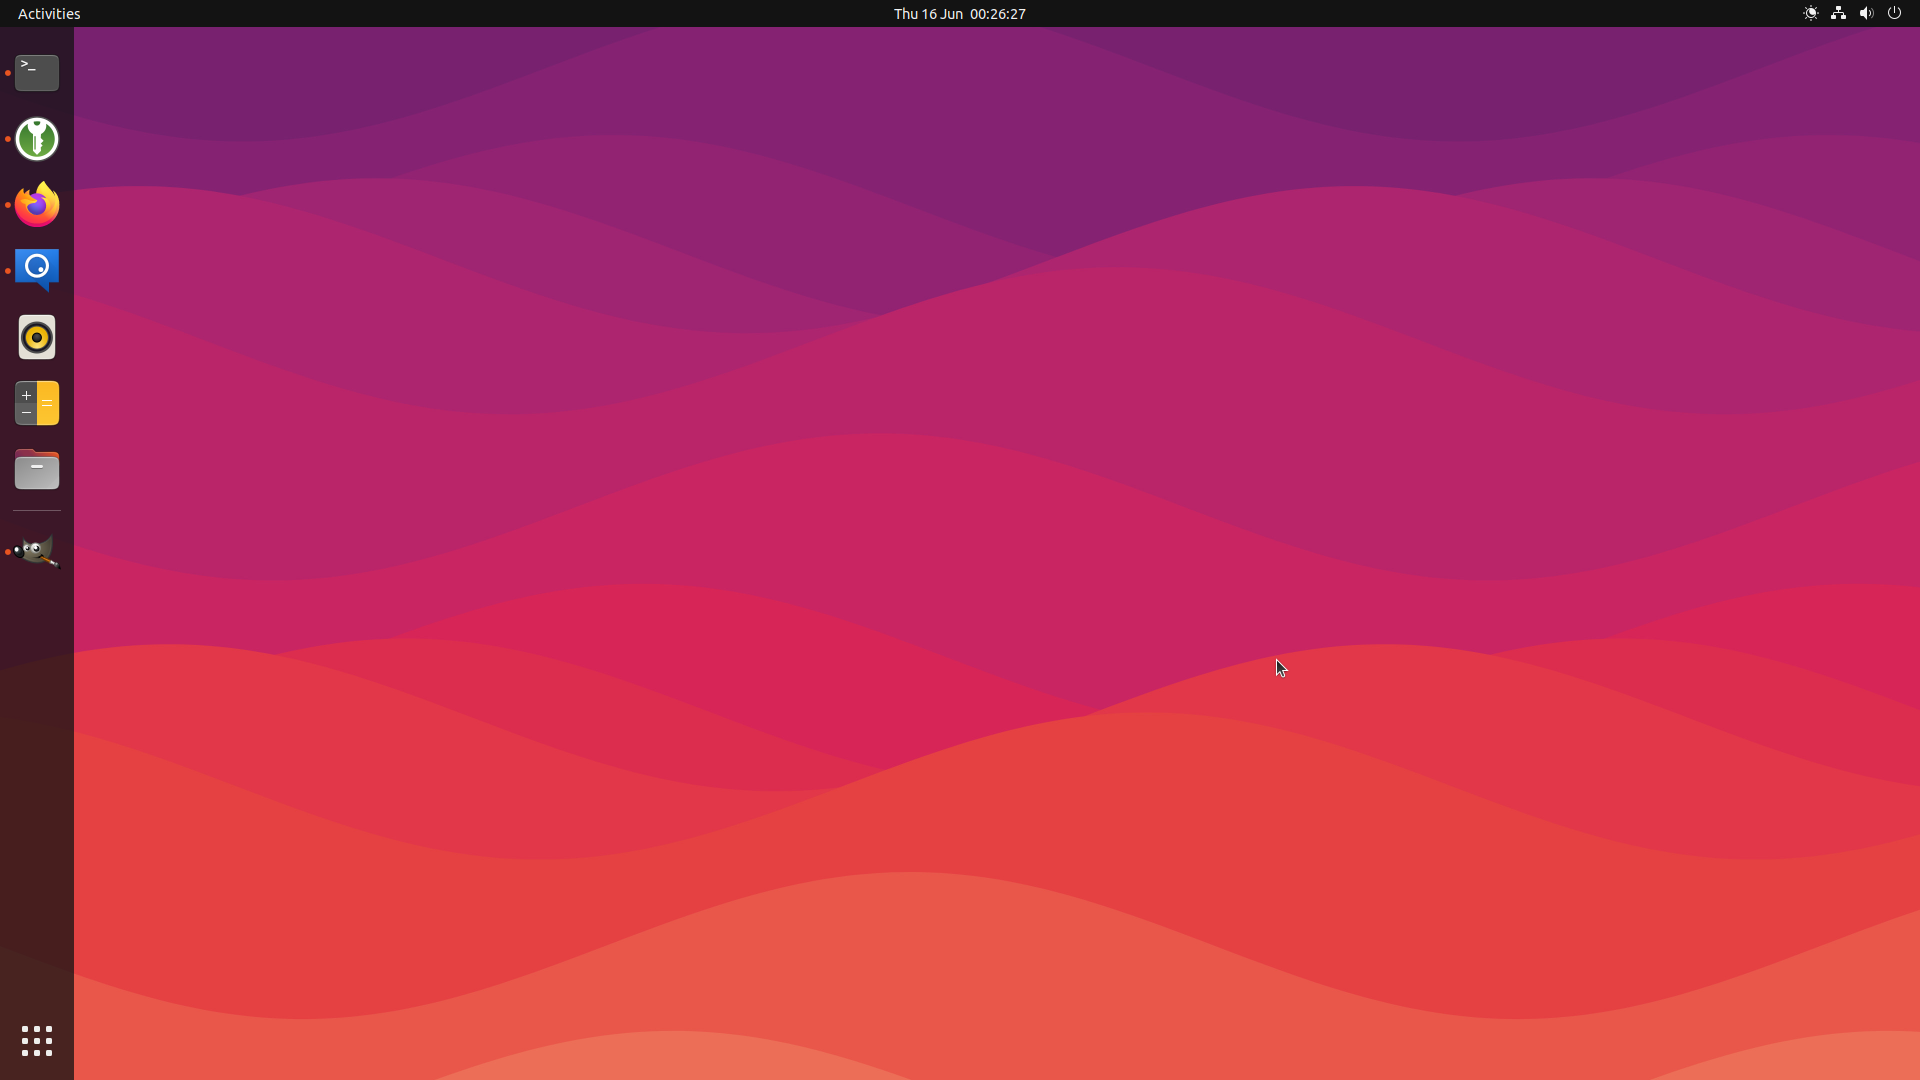 One of Jammy's more "radioactive" wallpapers; a series of waves fading from a bright purple to a positively eye-searing orange. I rather like it!